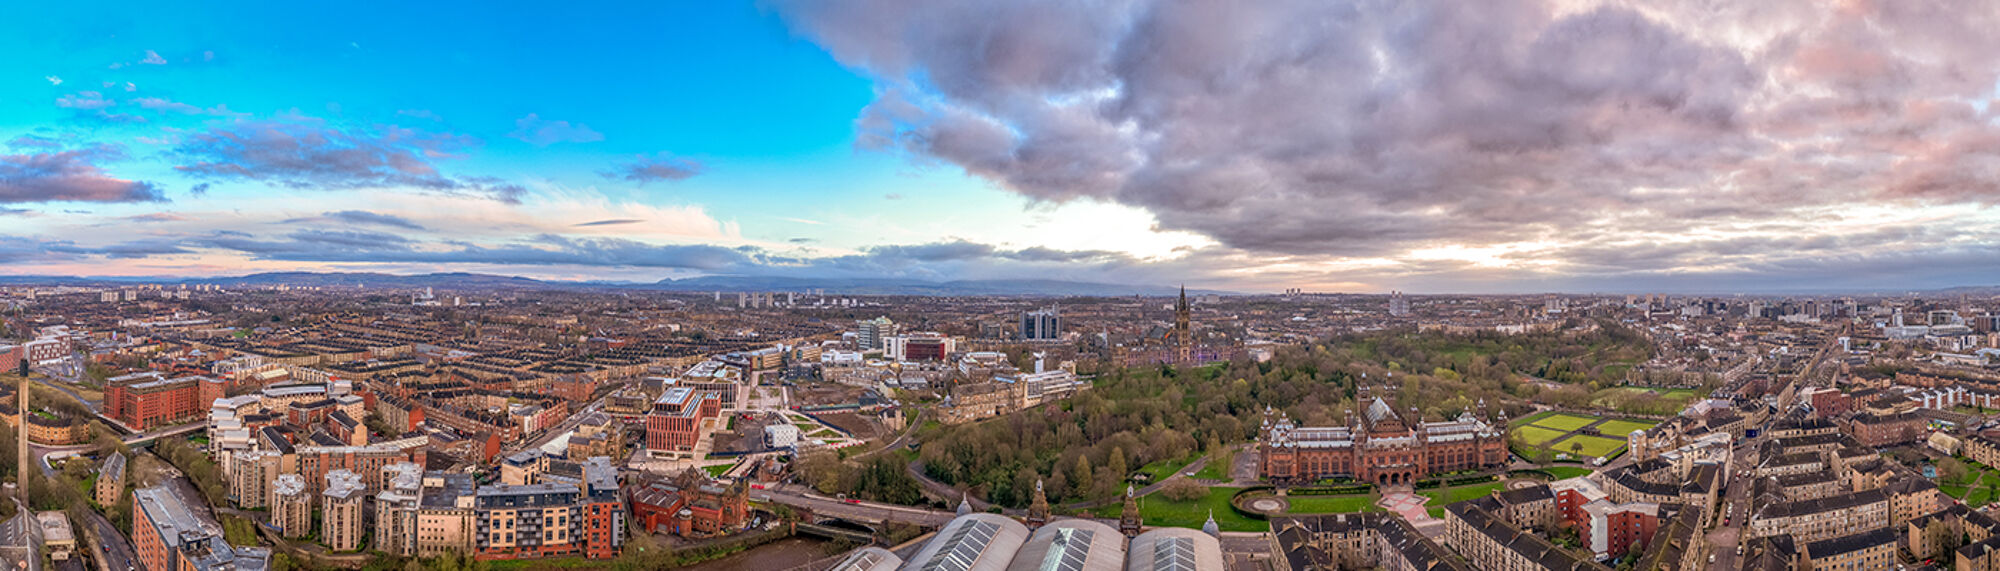 Drone image of the west end of Glasgow and the Gilmorehill campus